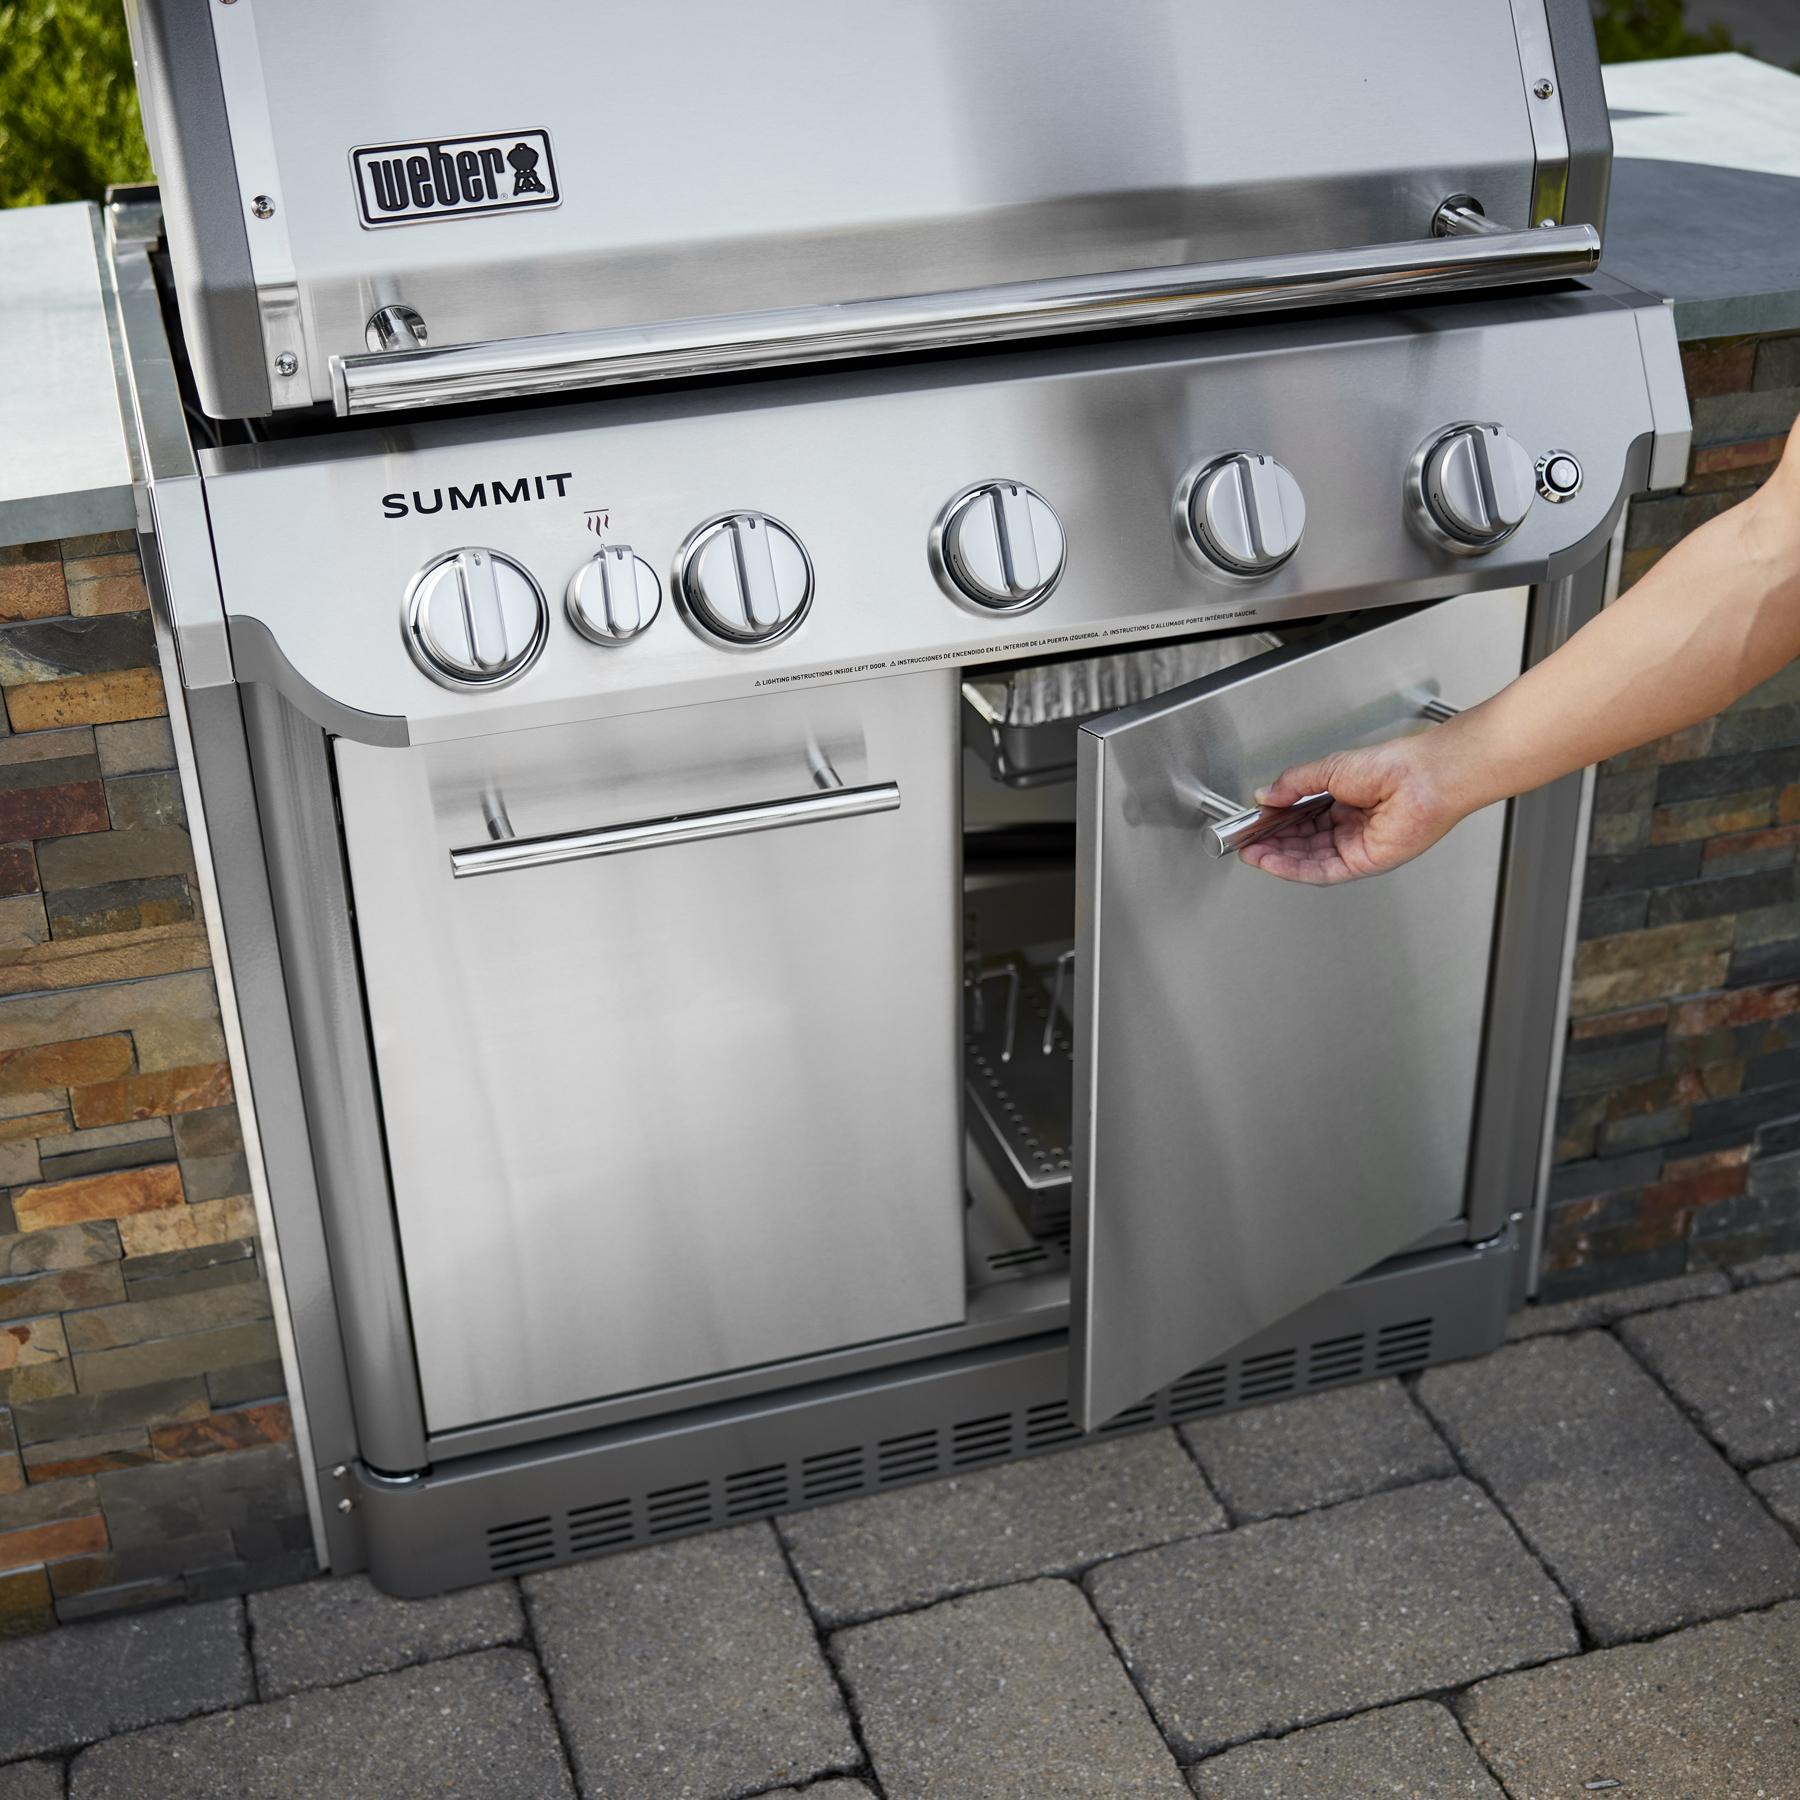 Weber Summit® SB38 S Built-In Gas Grill (Natural Gas) - Stainless Steel